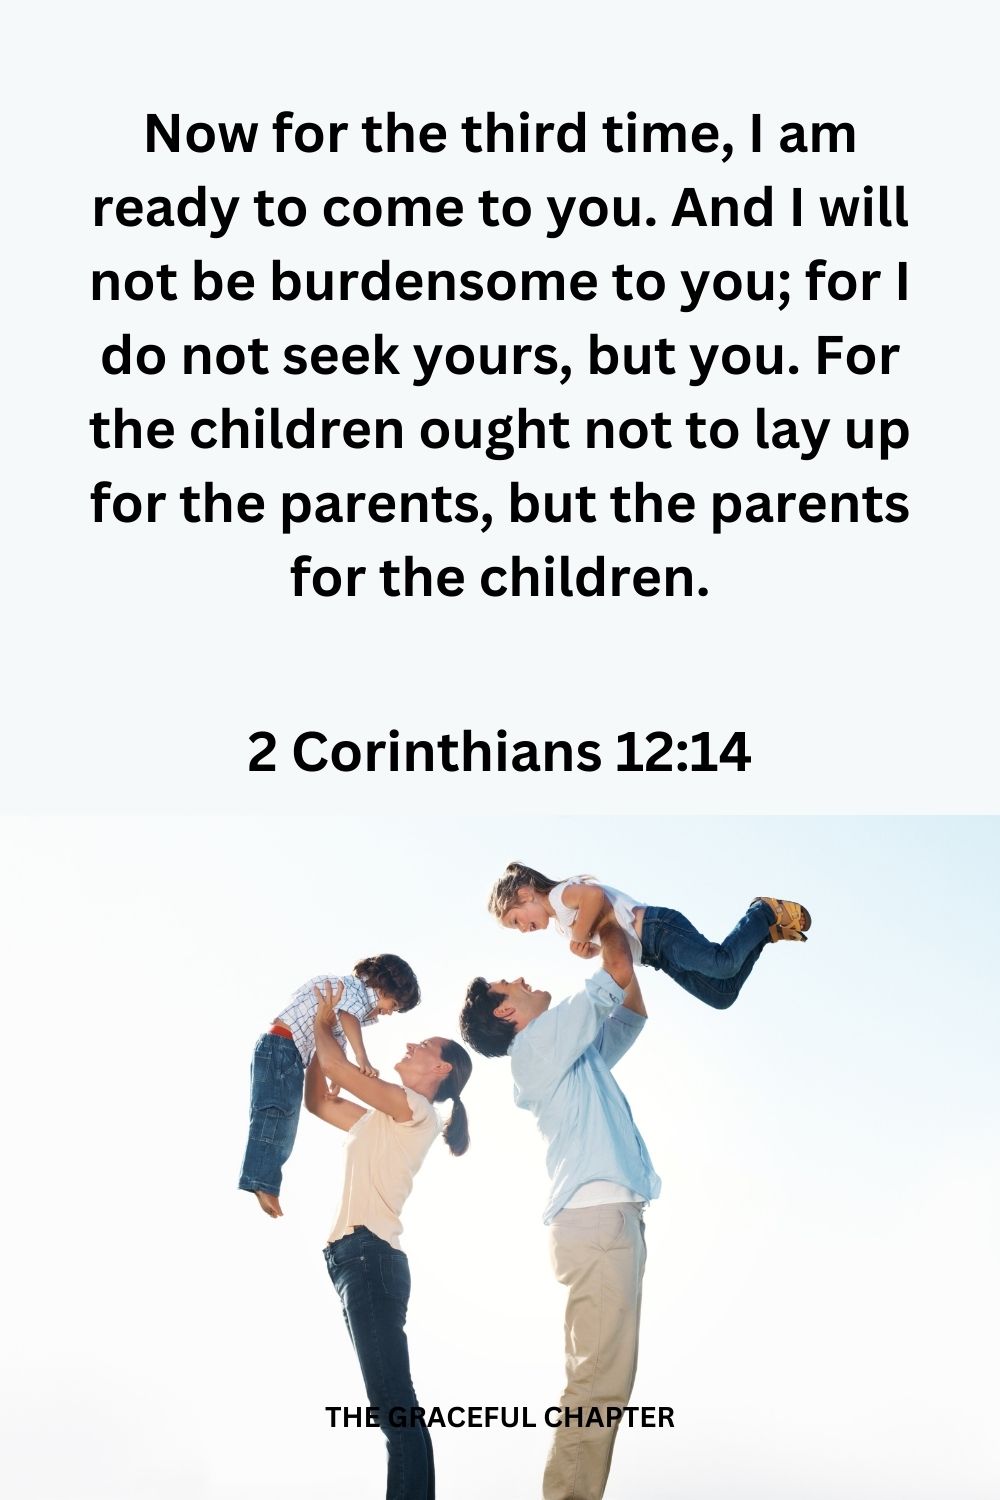 Now for the third time, I am ready to come to you. And I will not be burdensome to you; for I do not seek yours, but you. For the children ought not to lay up for the parents, but the parents for the children.2 Corinthians 12:14